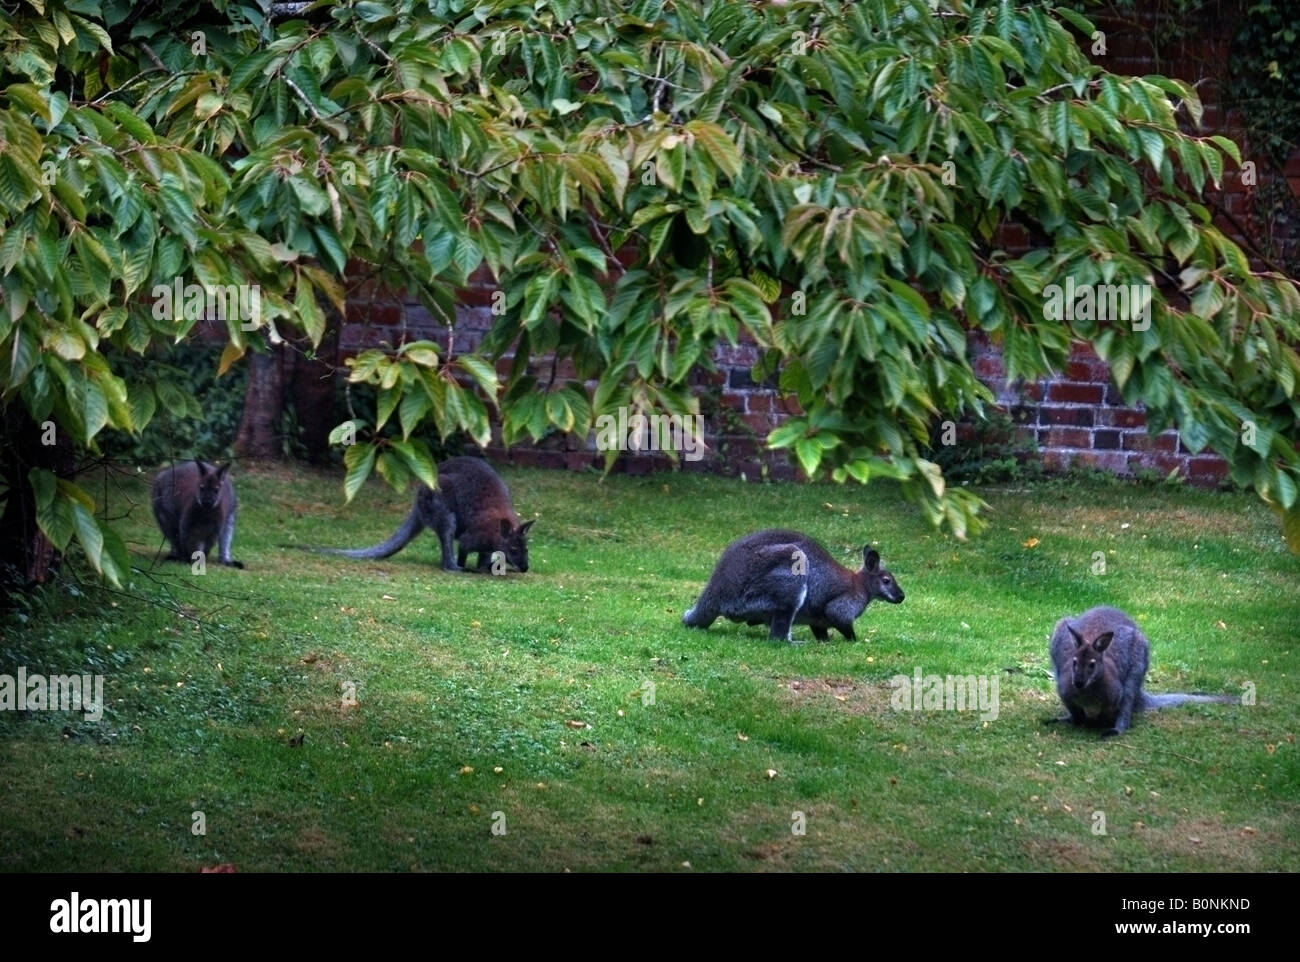 WALLABIES GRAZING IN THE GARDEN OF A COTSWOLD ESTATE Stock Photo